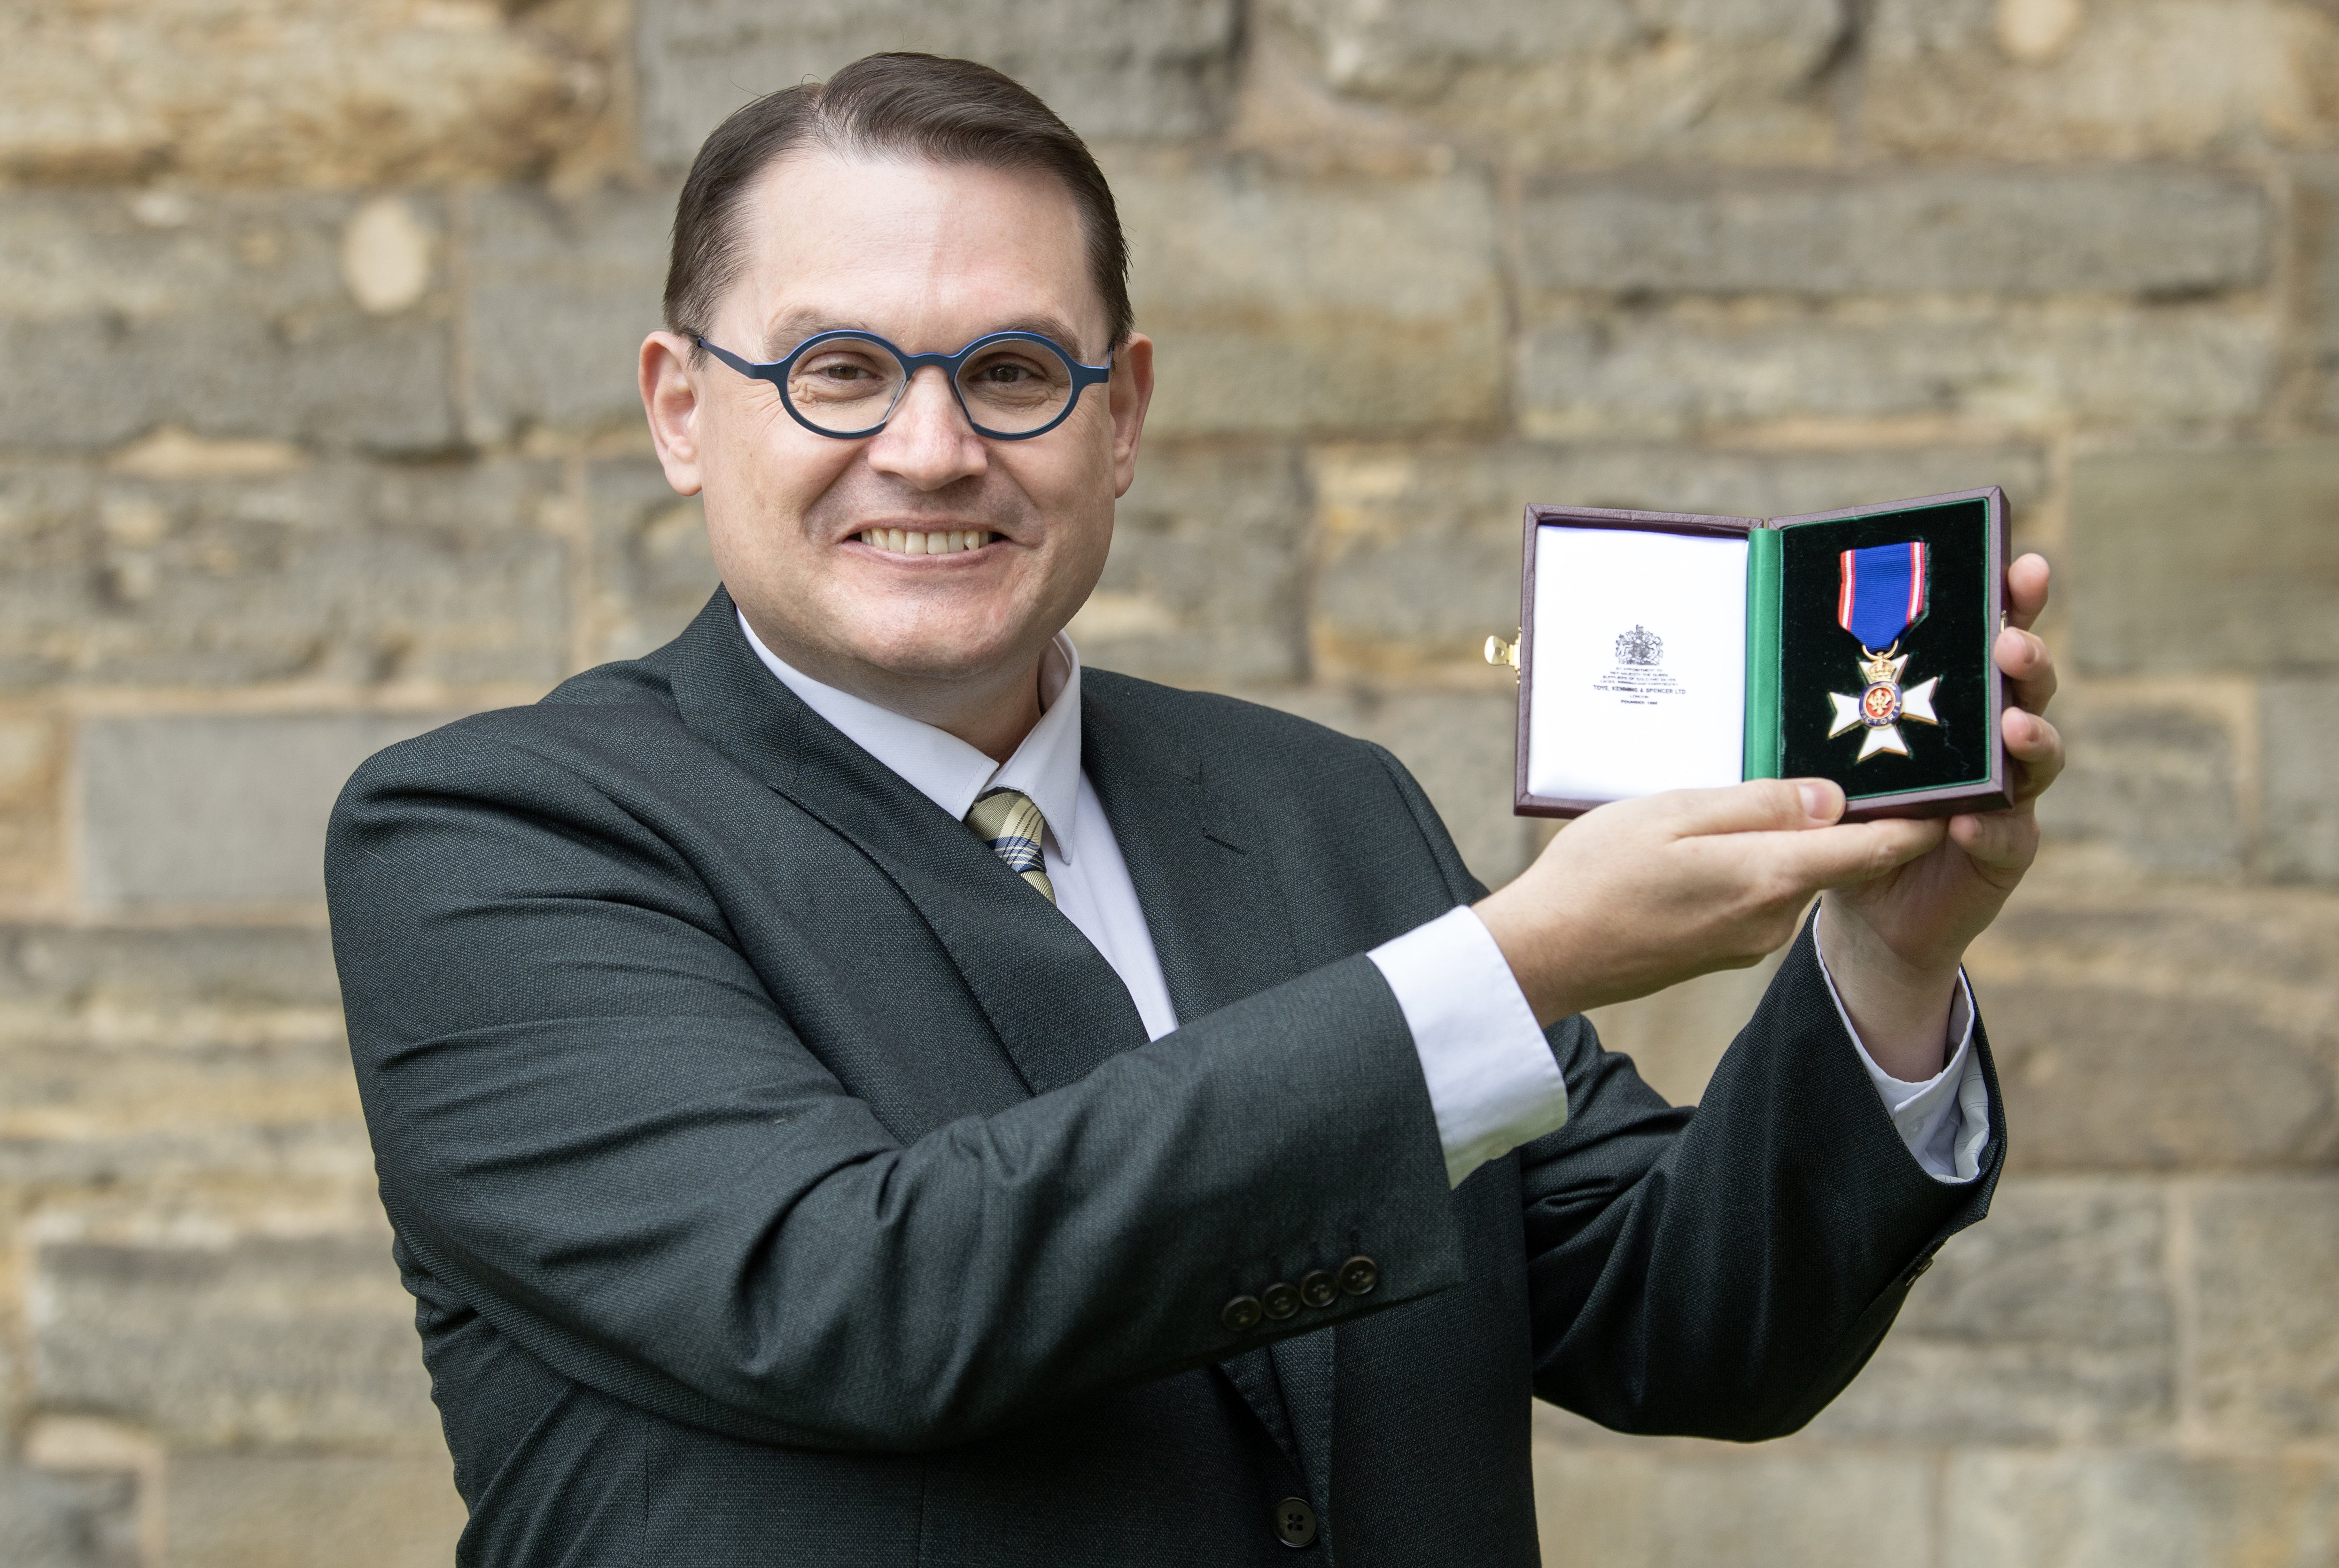 Professor Paul Mealor has been made a Lieutenant of the Royal Victorian Order (Lesley Martin/PA)